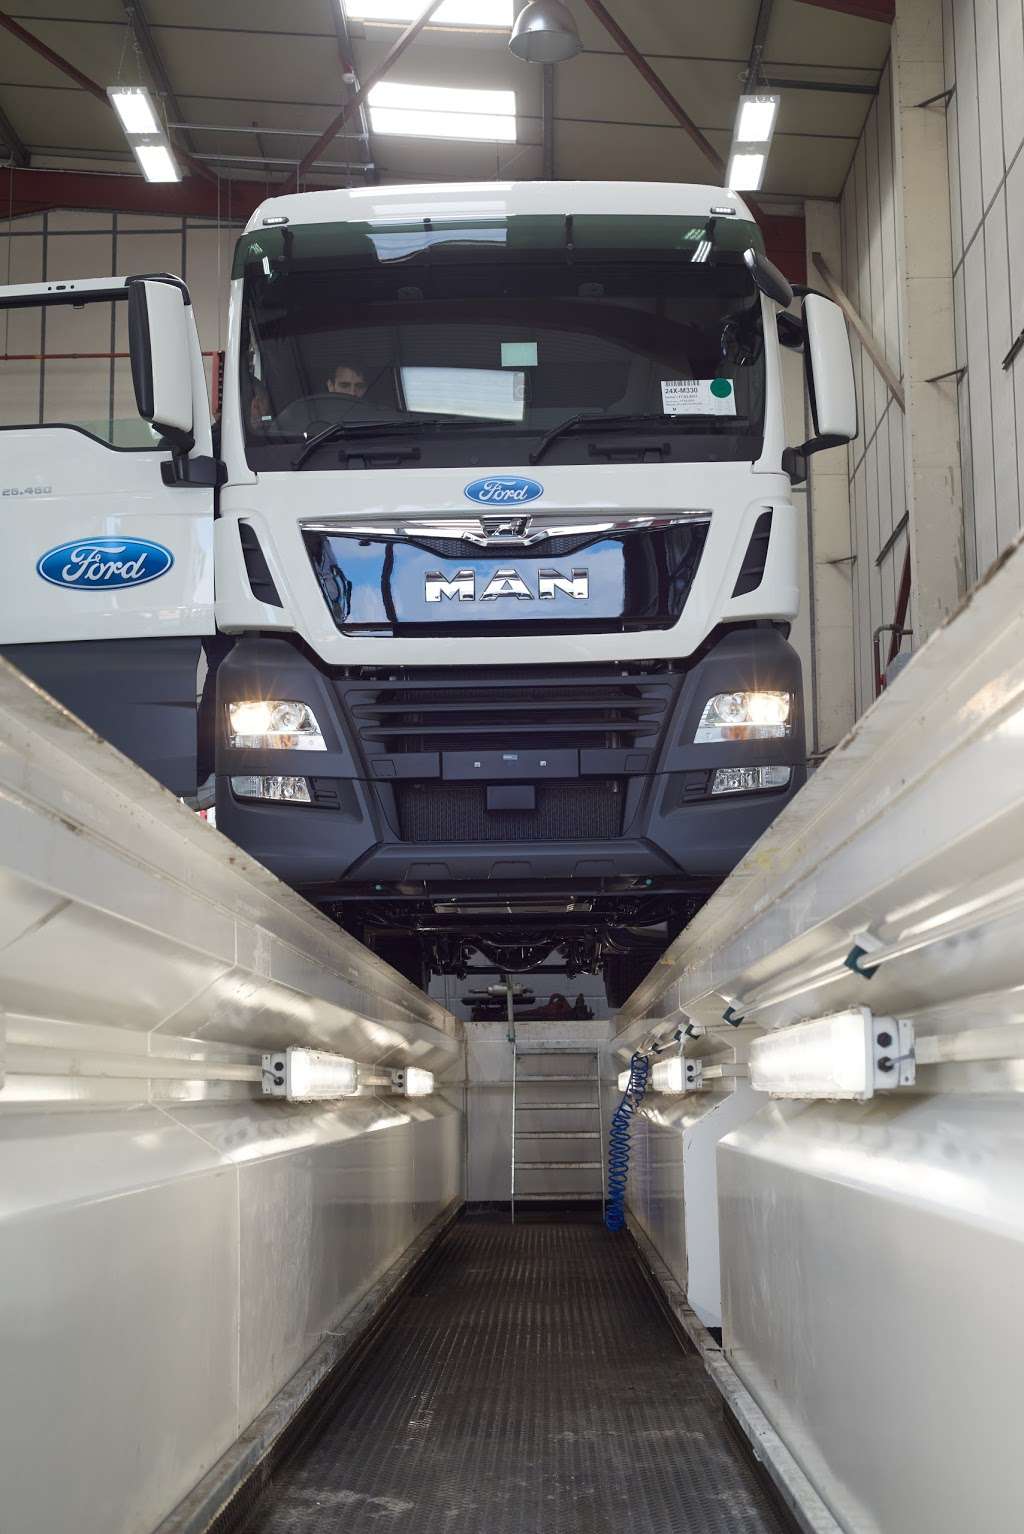 PCL West Thurrock MAN Trucks | Parker House, Manor Rd, Grays RM20 4EH, UK | Phone: 01708 686268